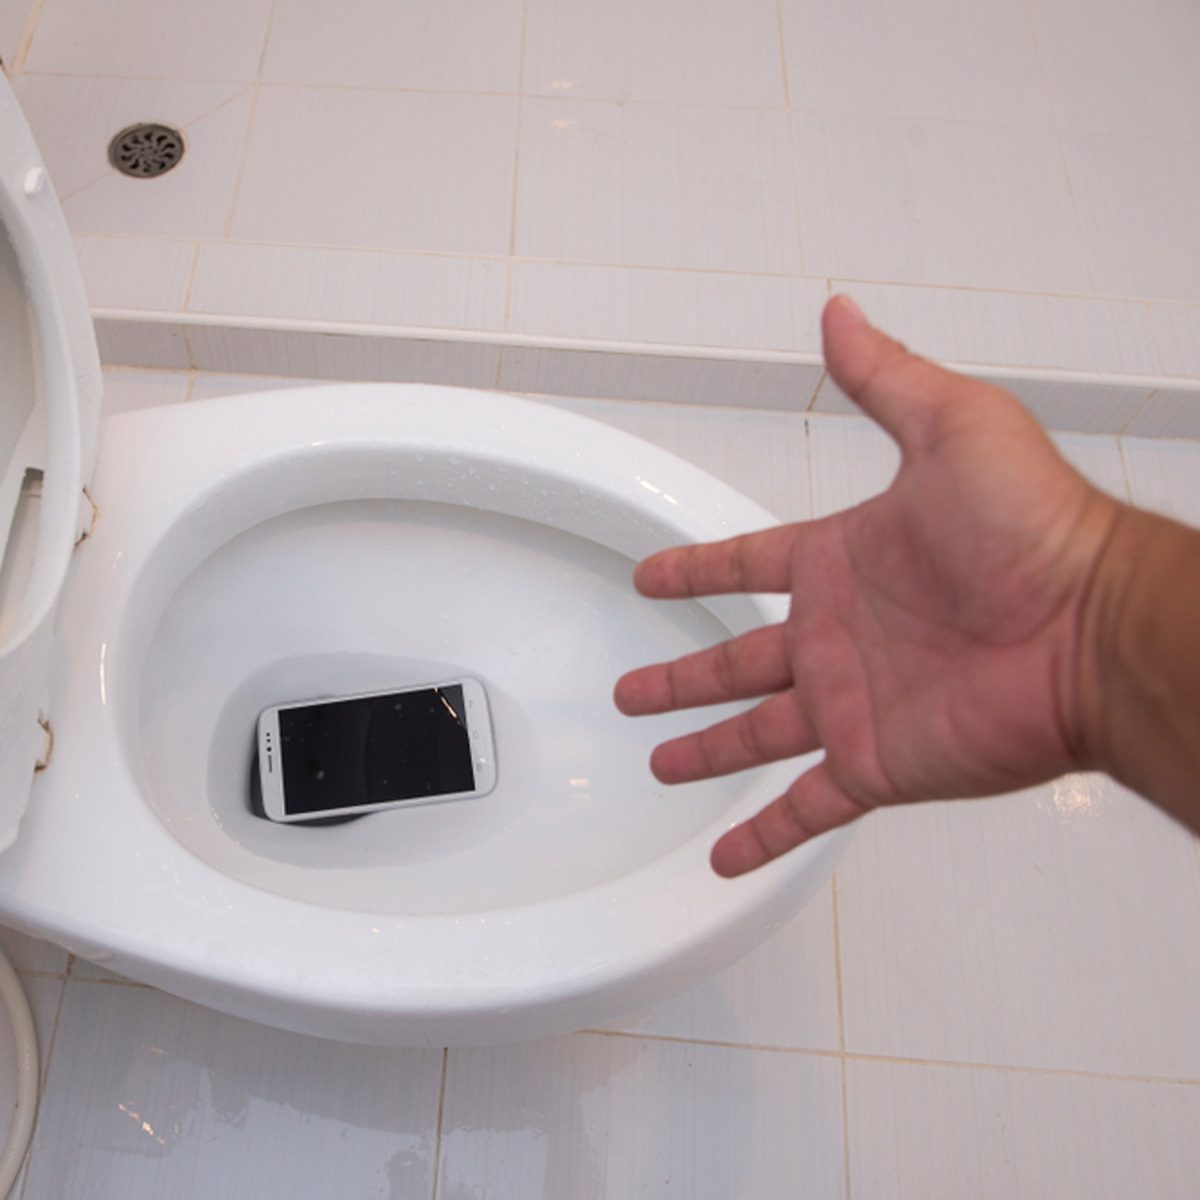 Dropped Phone in Toilet? Here's What to Do If Phone Falls in Water